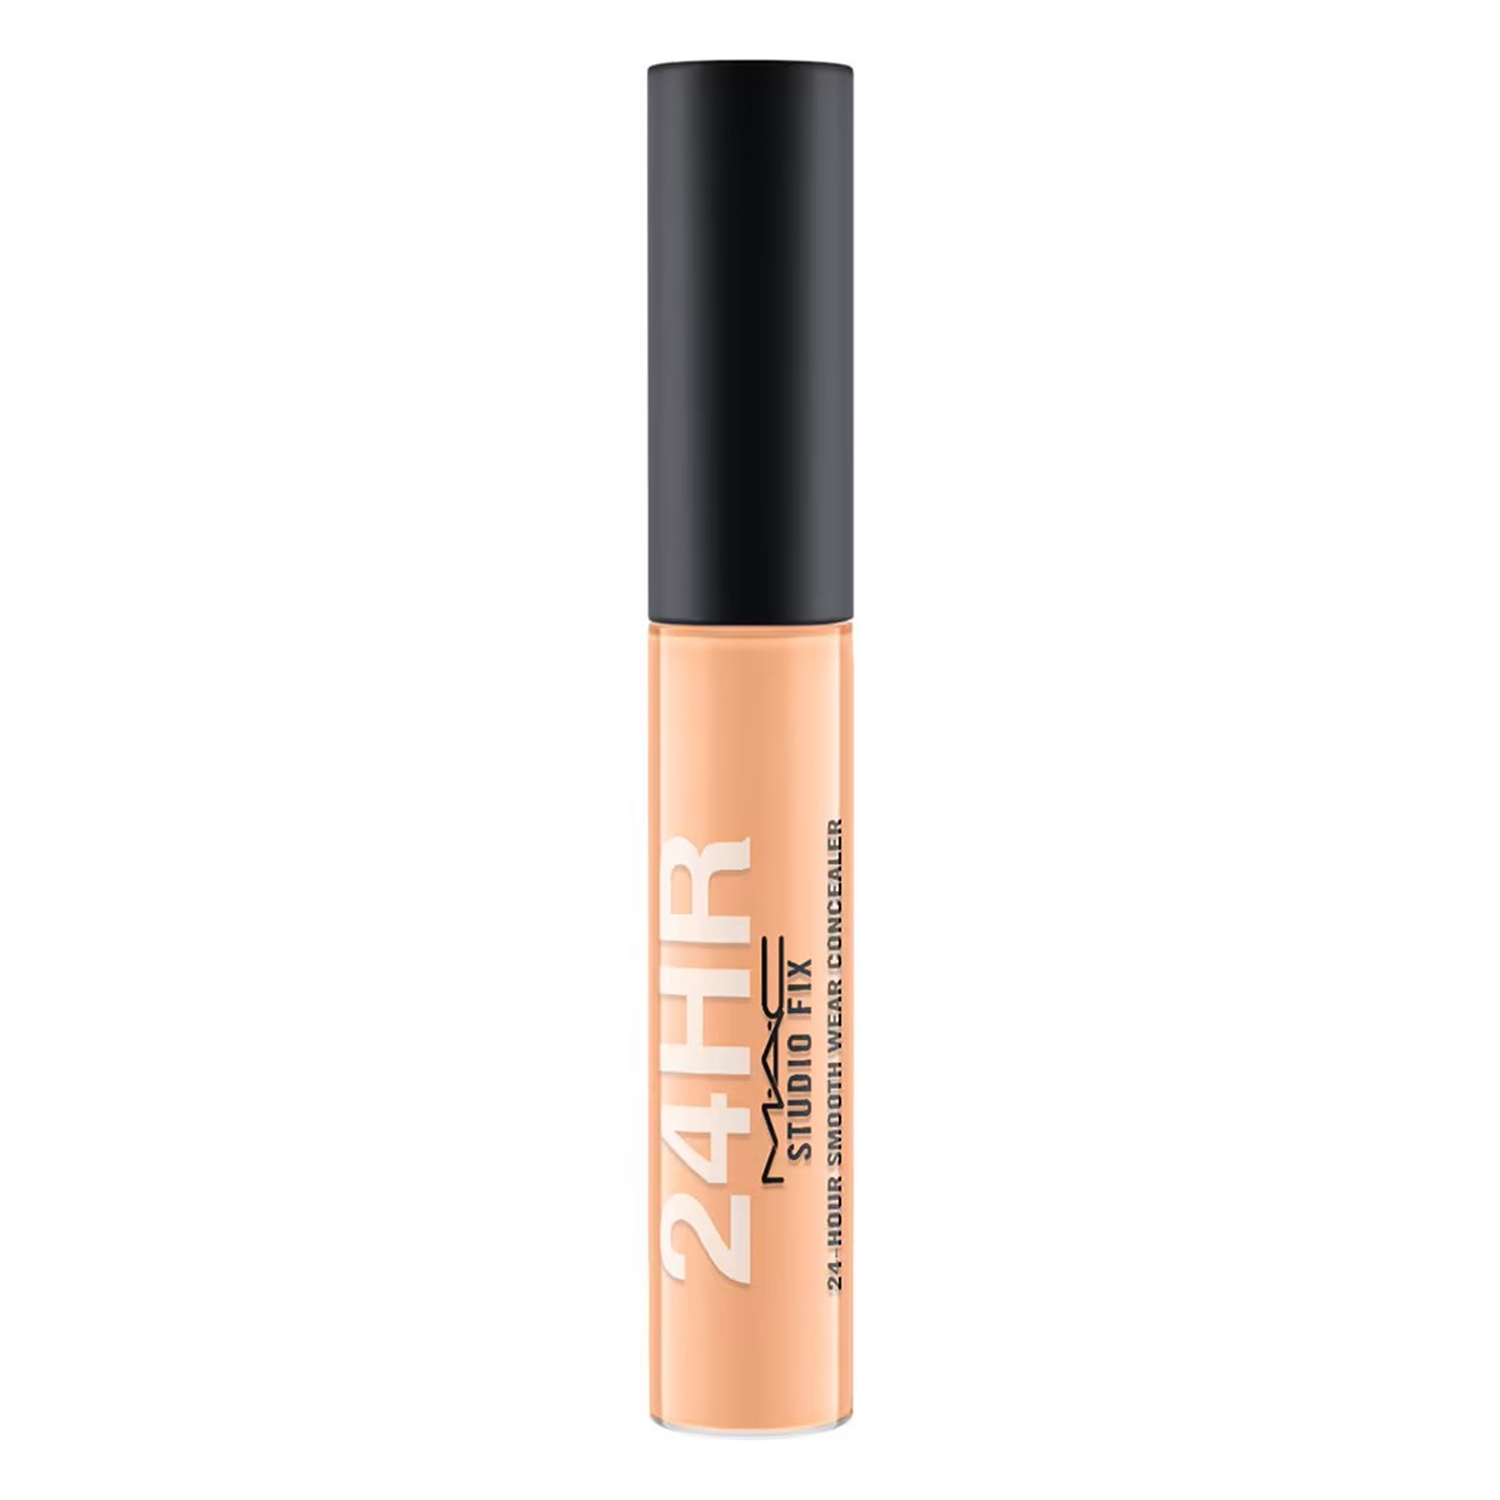 M.A.C | M.A.C Studio Fix 24-Hour Smooth Wear Concealer - NW34 (7ml)